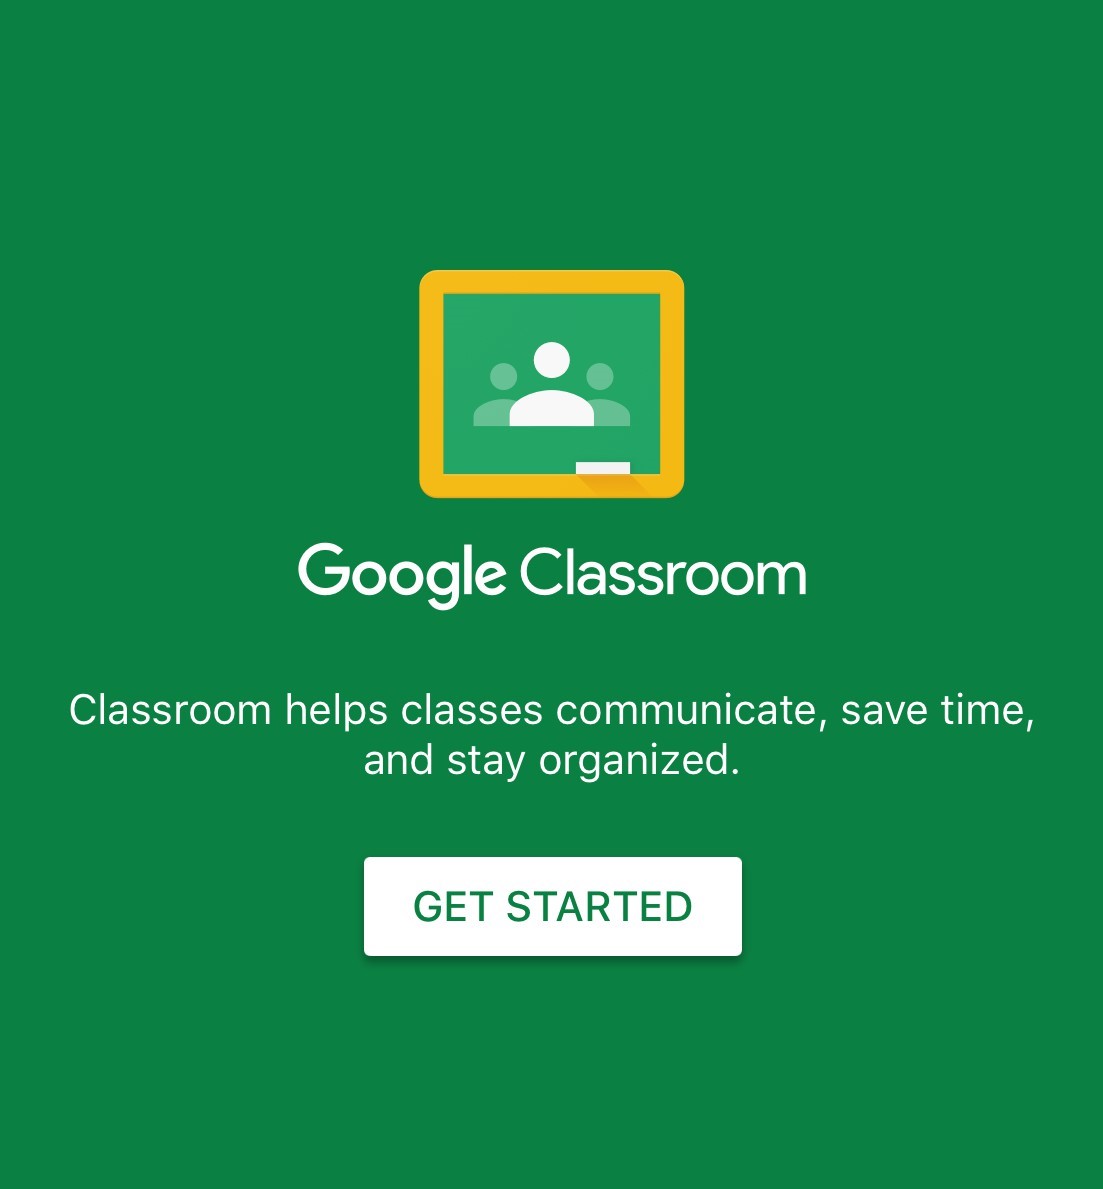 10 Easy Ways To Gamify Google Classroom The Tech Edvocate